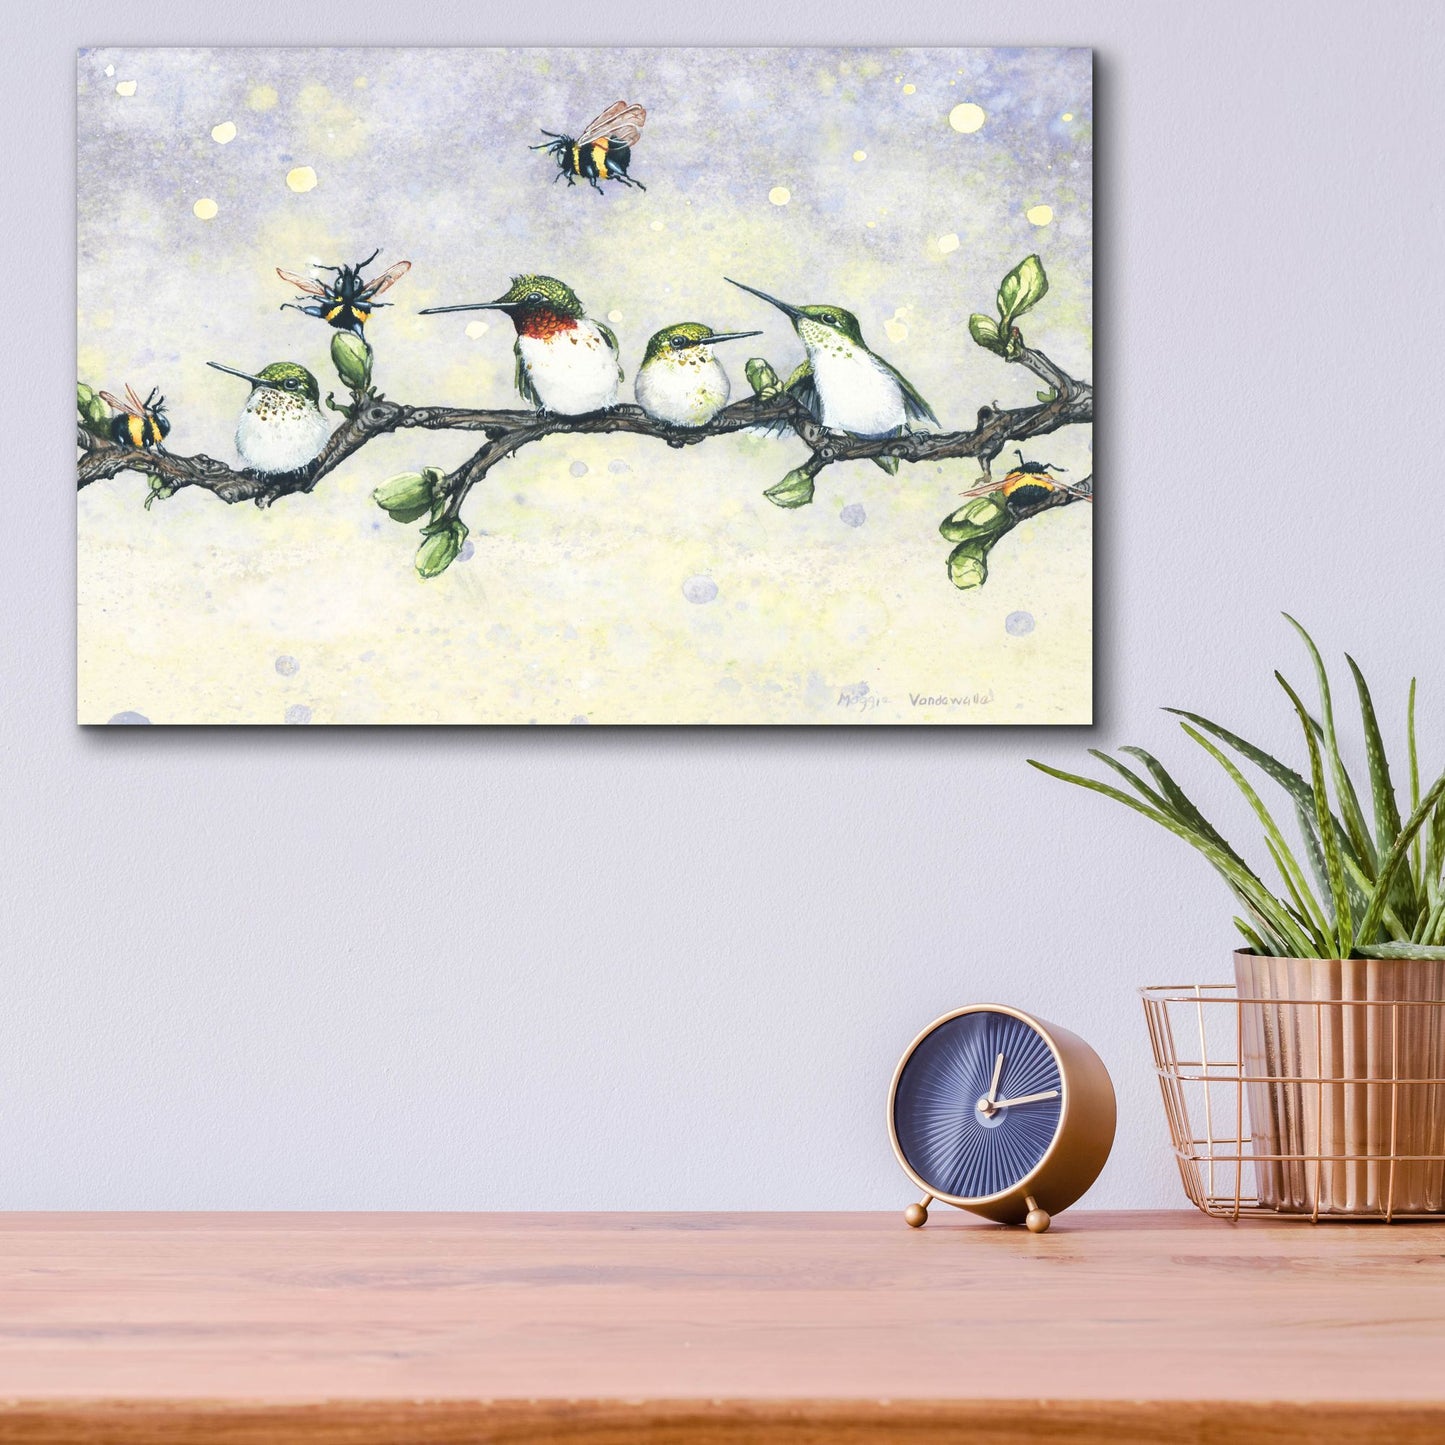 Epic Art 'The Birds and the Bees' by Maggie Vandewalle, Acrylic Glass Wall Art,16x12